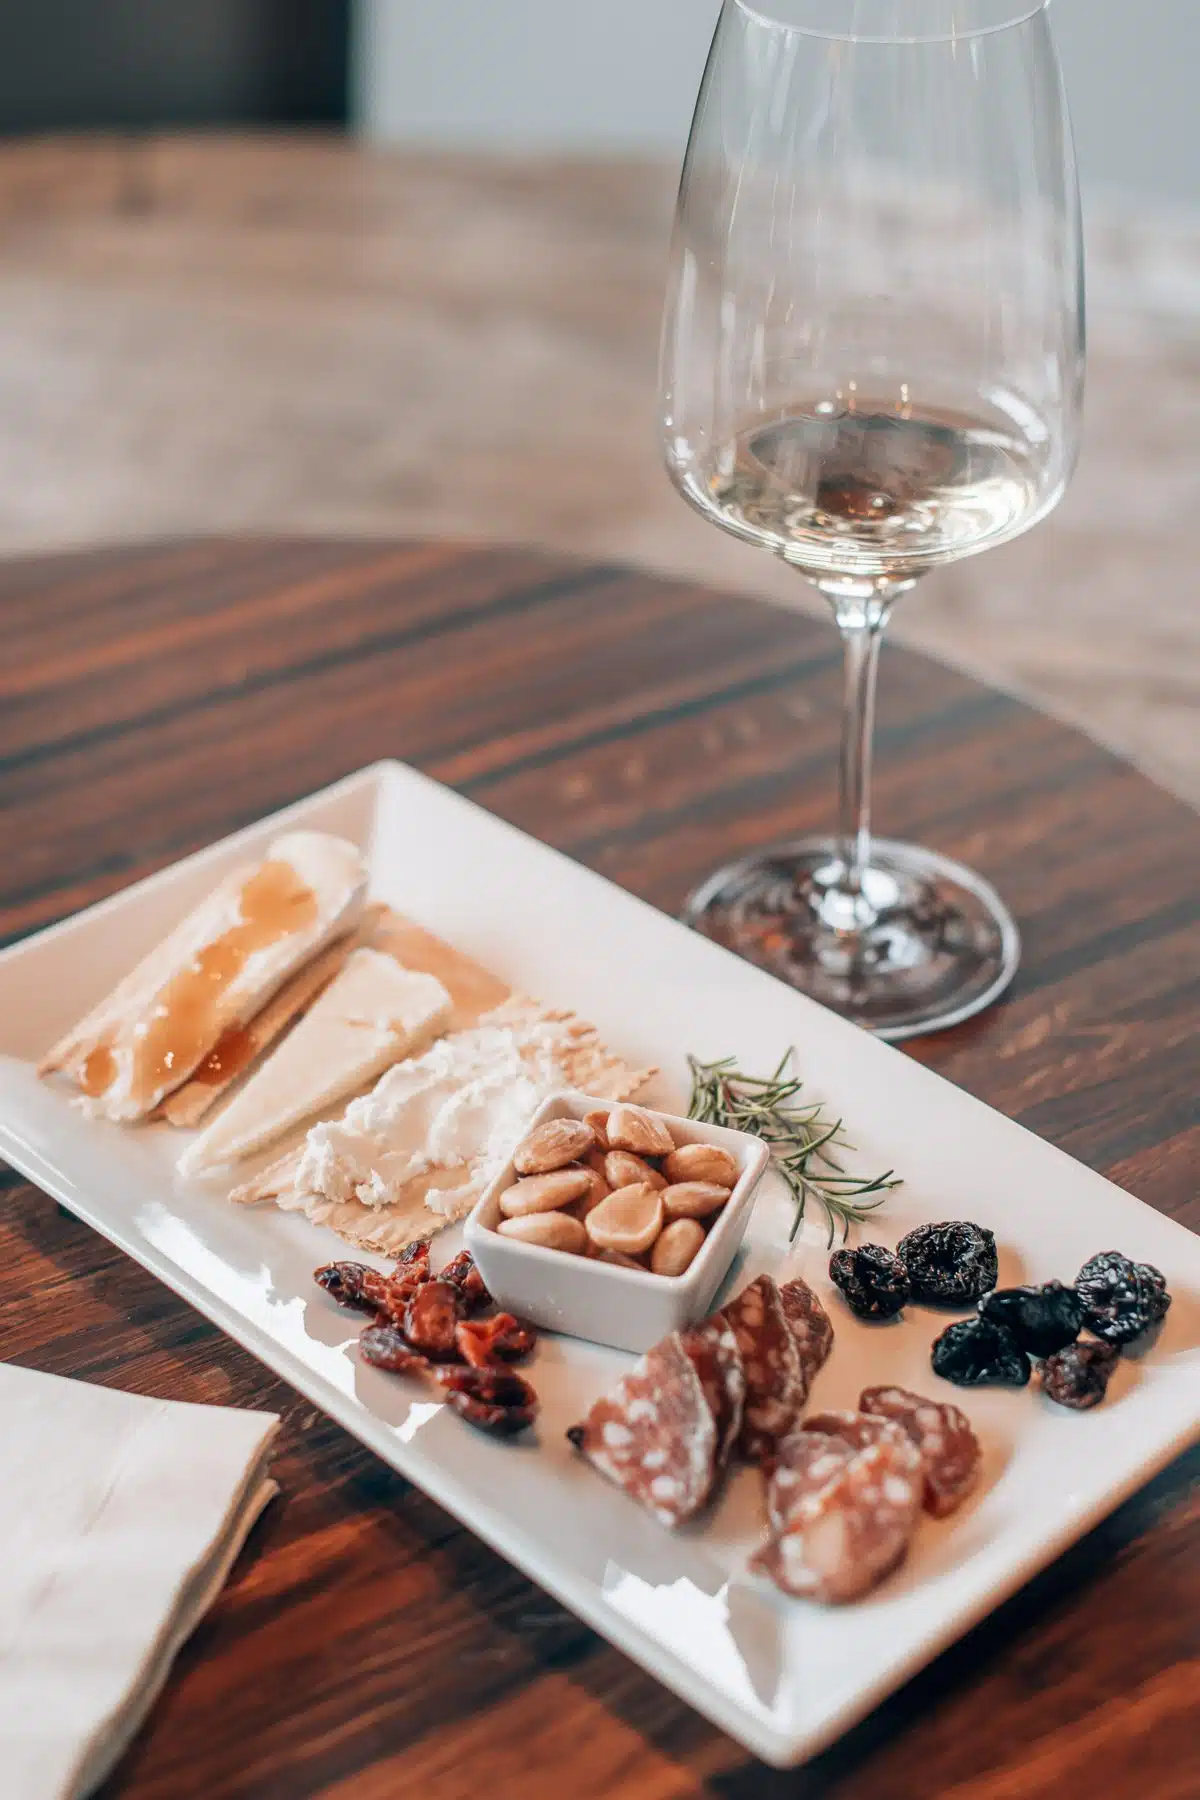 The best wineries in Healdsburg, by travel blogger What The Fab